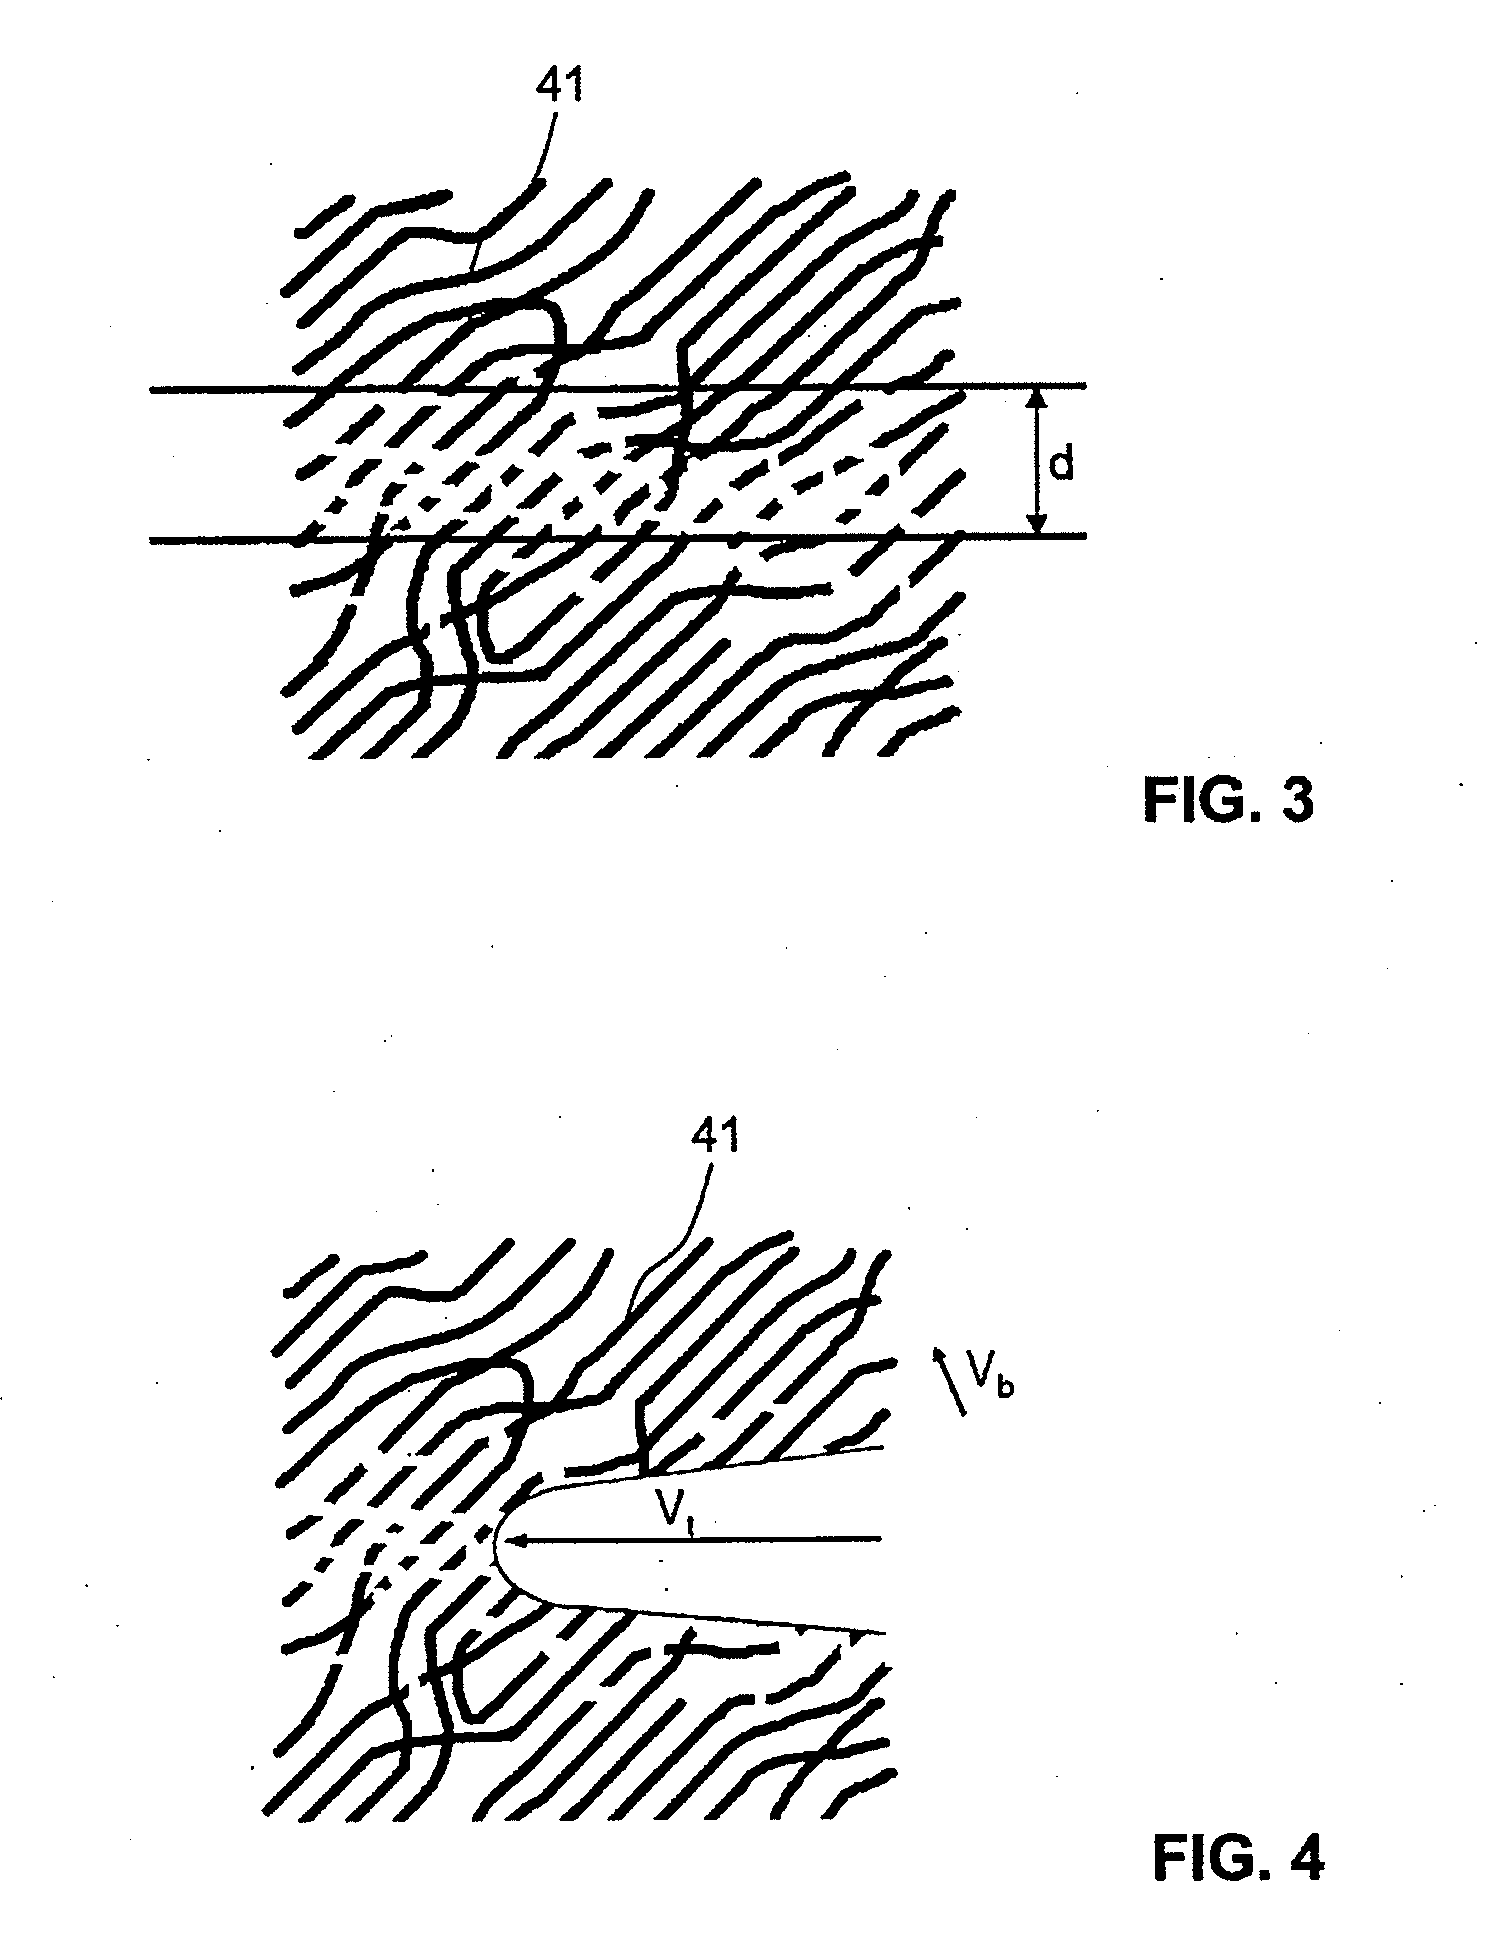 Electrochemical energy store comprising a separator